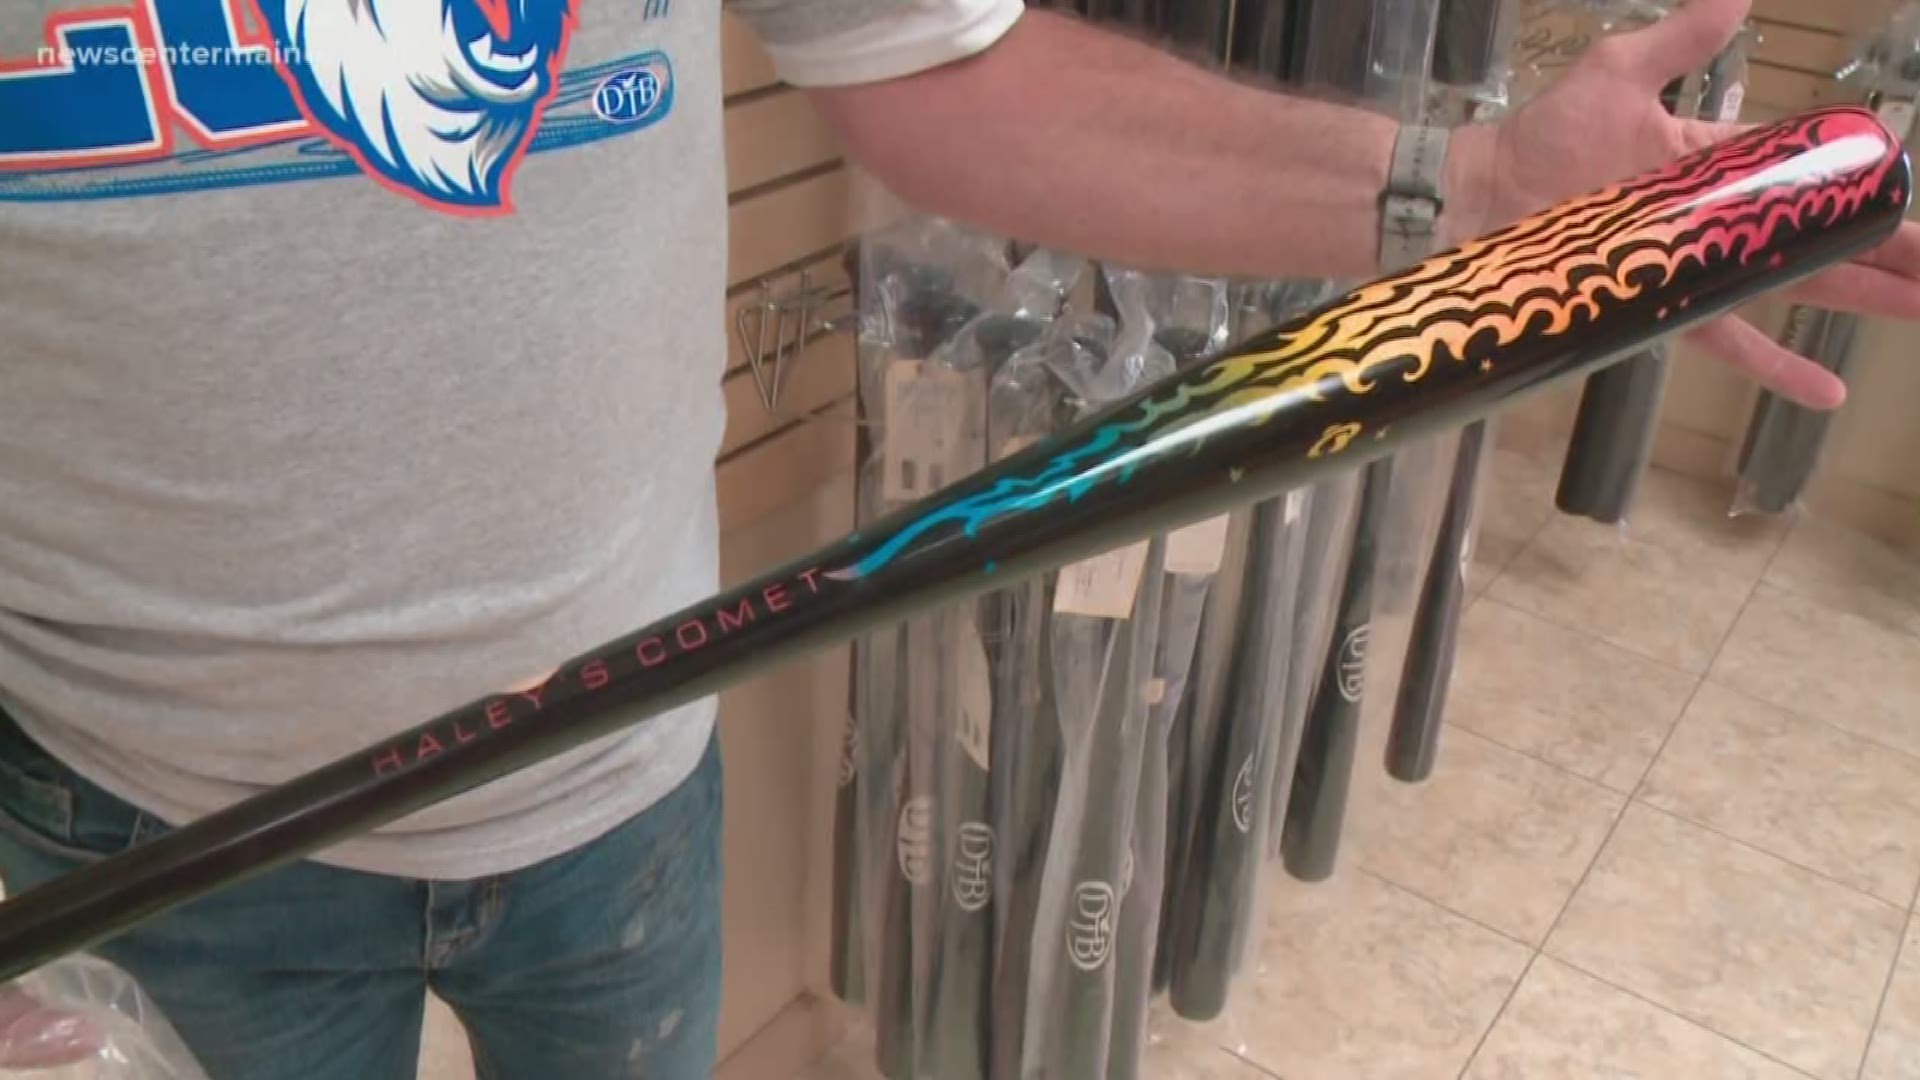 The bat that won the Major League Home Run Derby was made by Dove Tail Bats of Shirely, Maine.